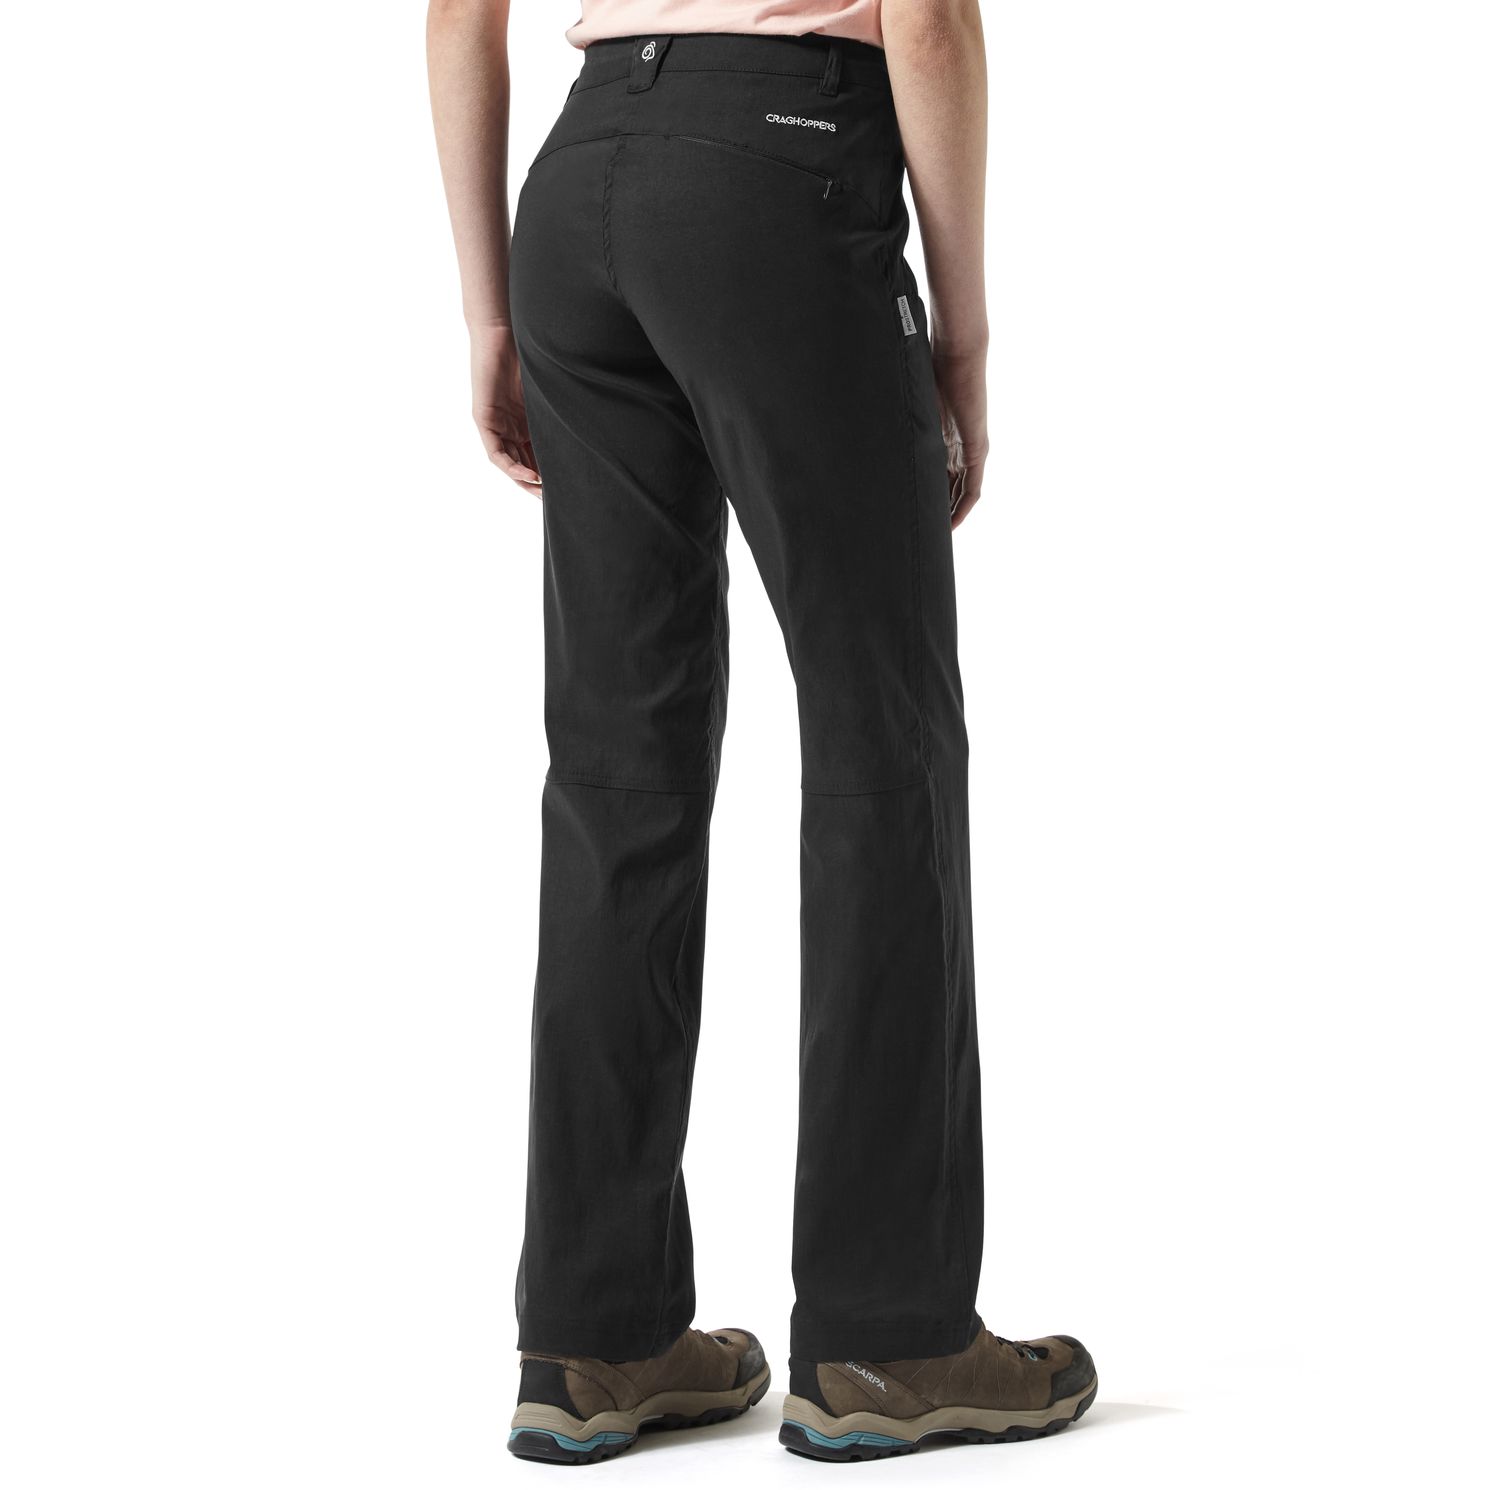 craghoppers ladies lined trousers